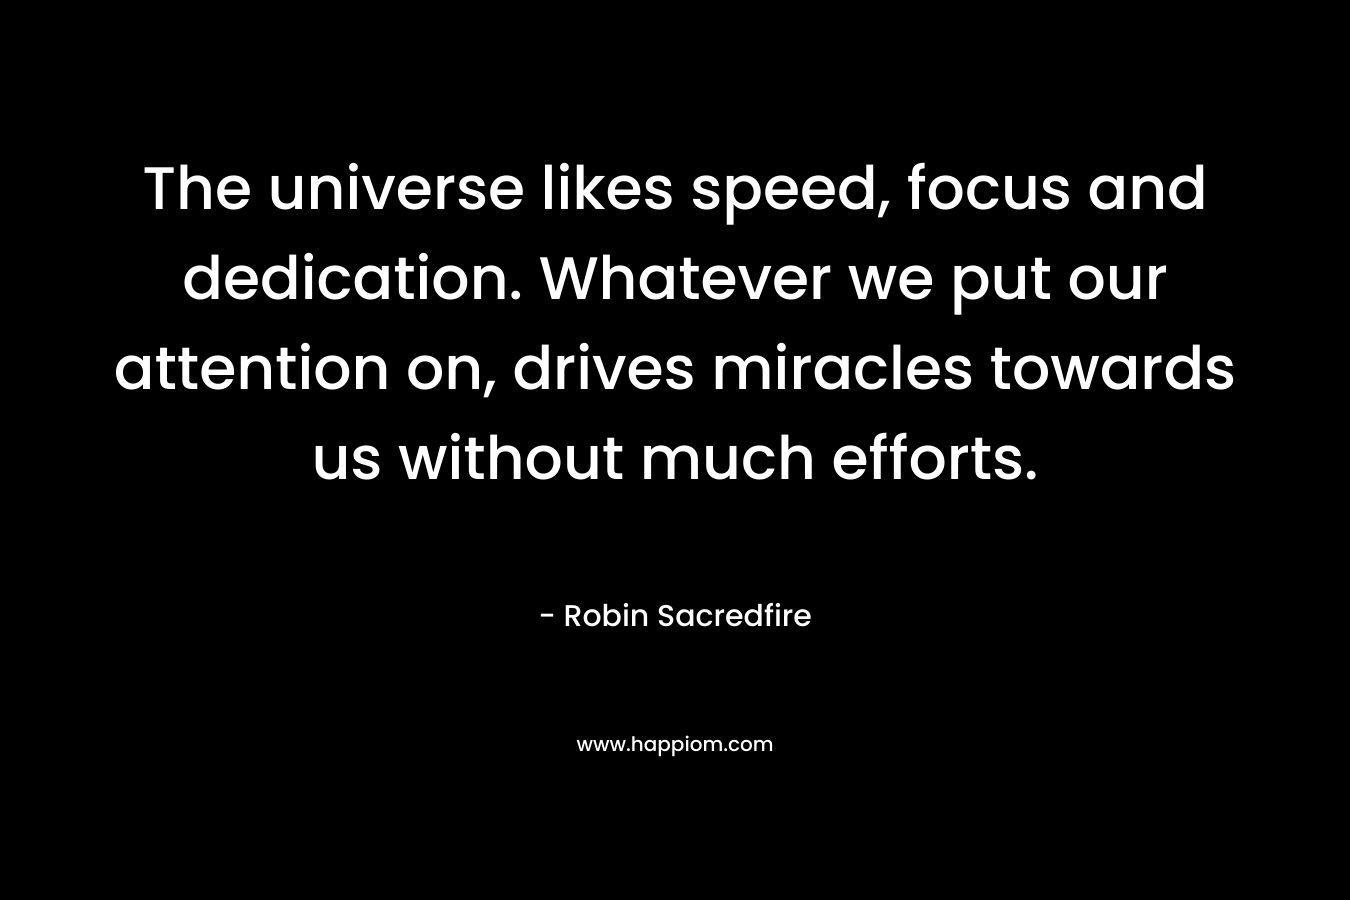 The universe likes speed, focus and dedication. Whatever we put our attention on, drives miracles towards us without much efforts. – Robin Sacredfire